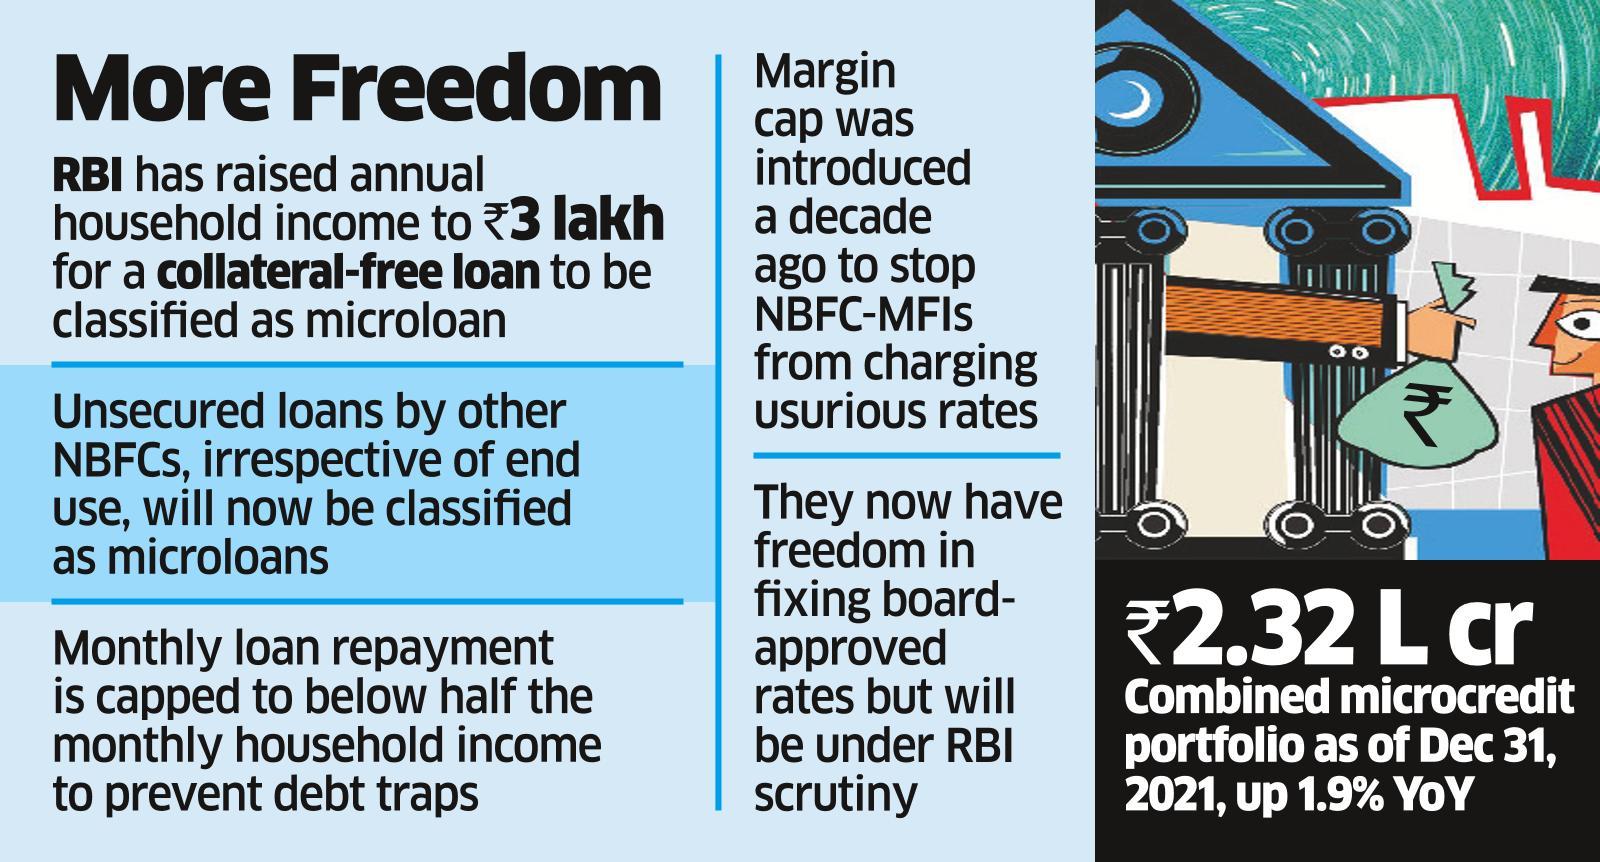 RBI Removes Rate Caps On NBFC-MFIs